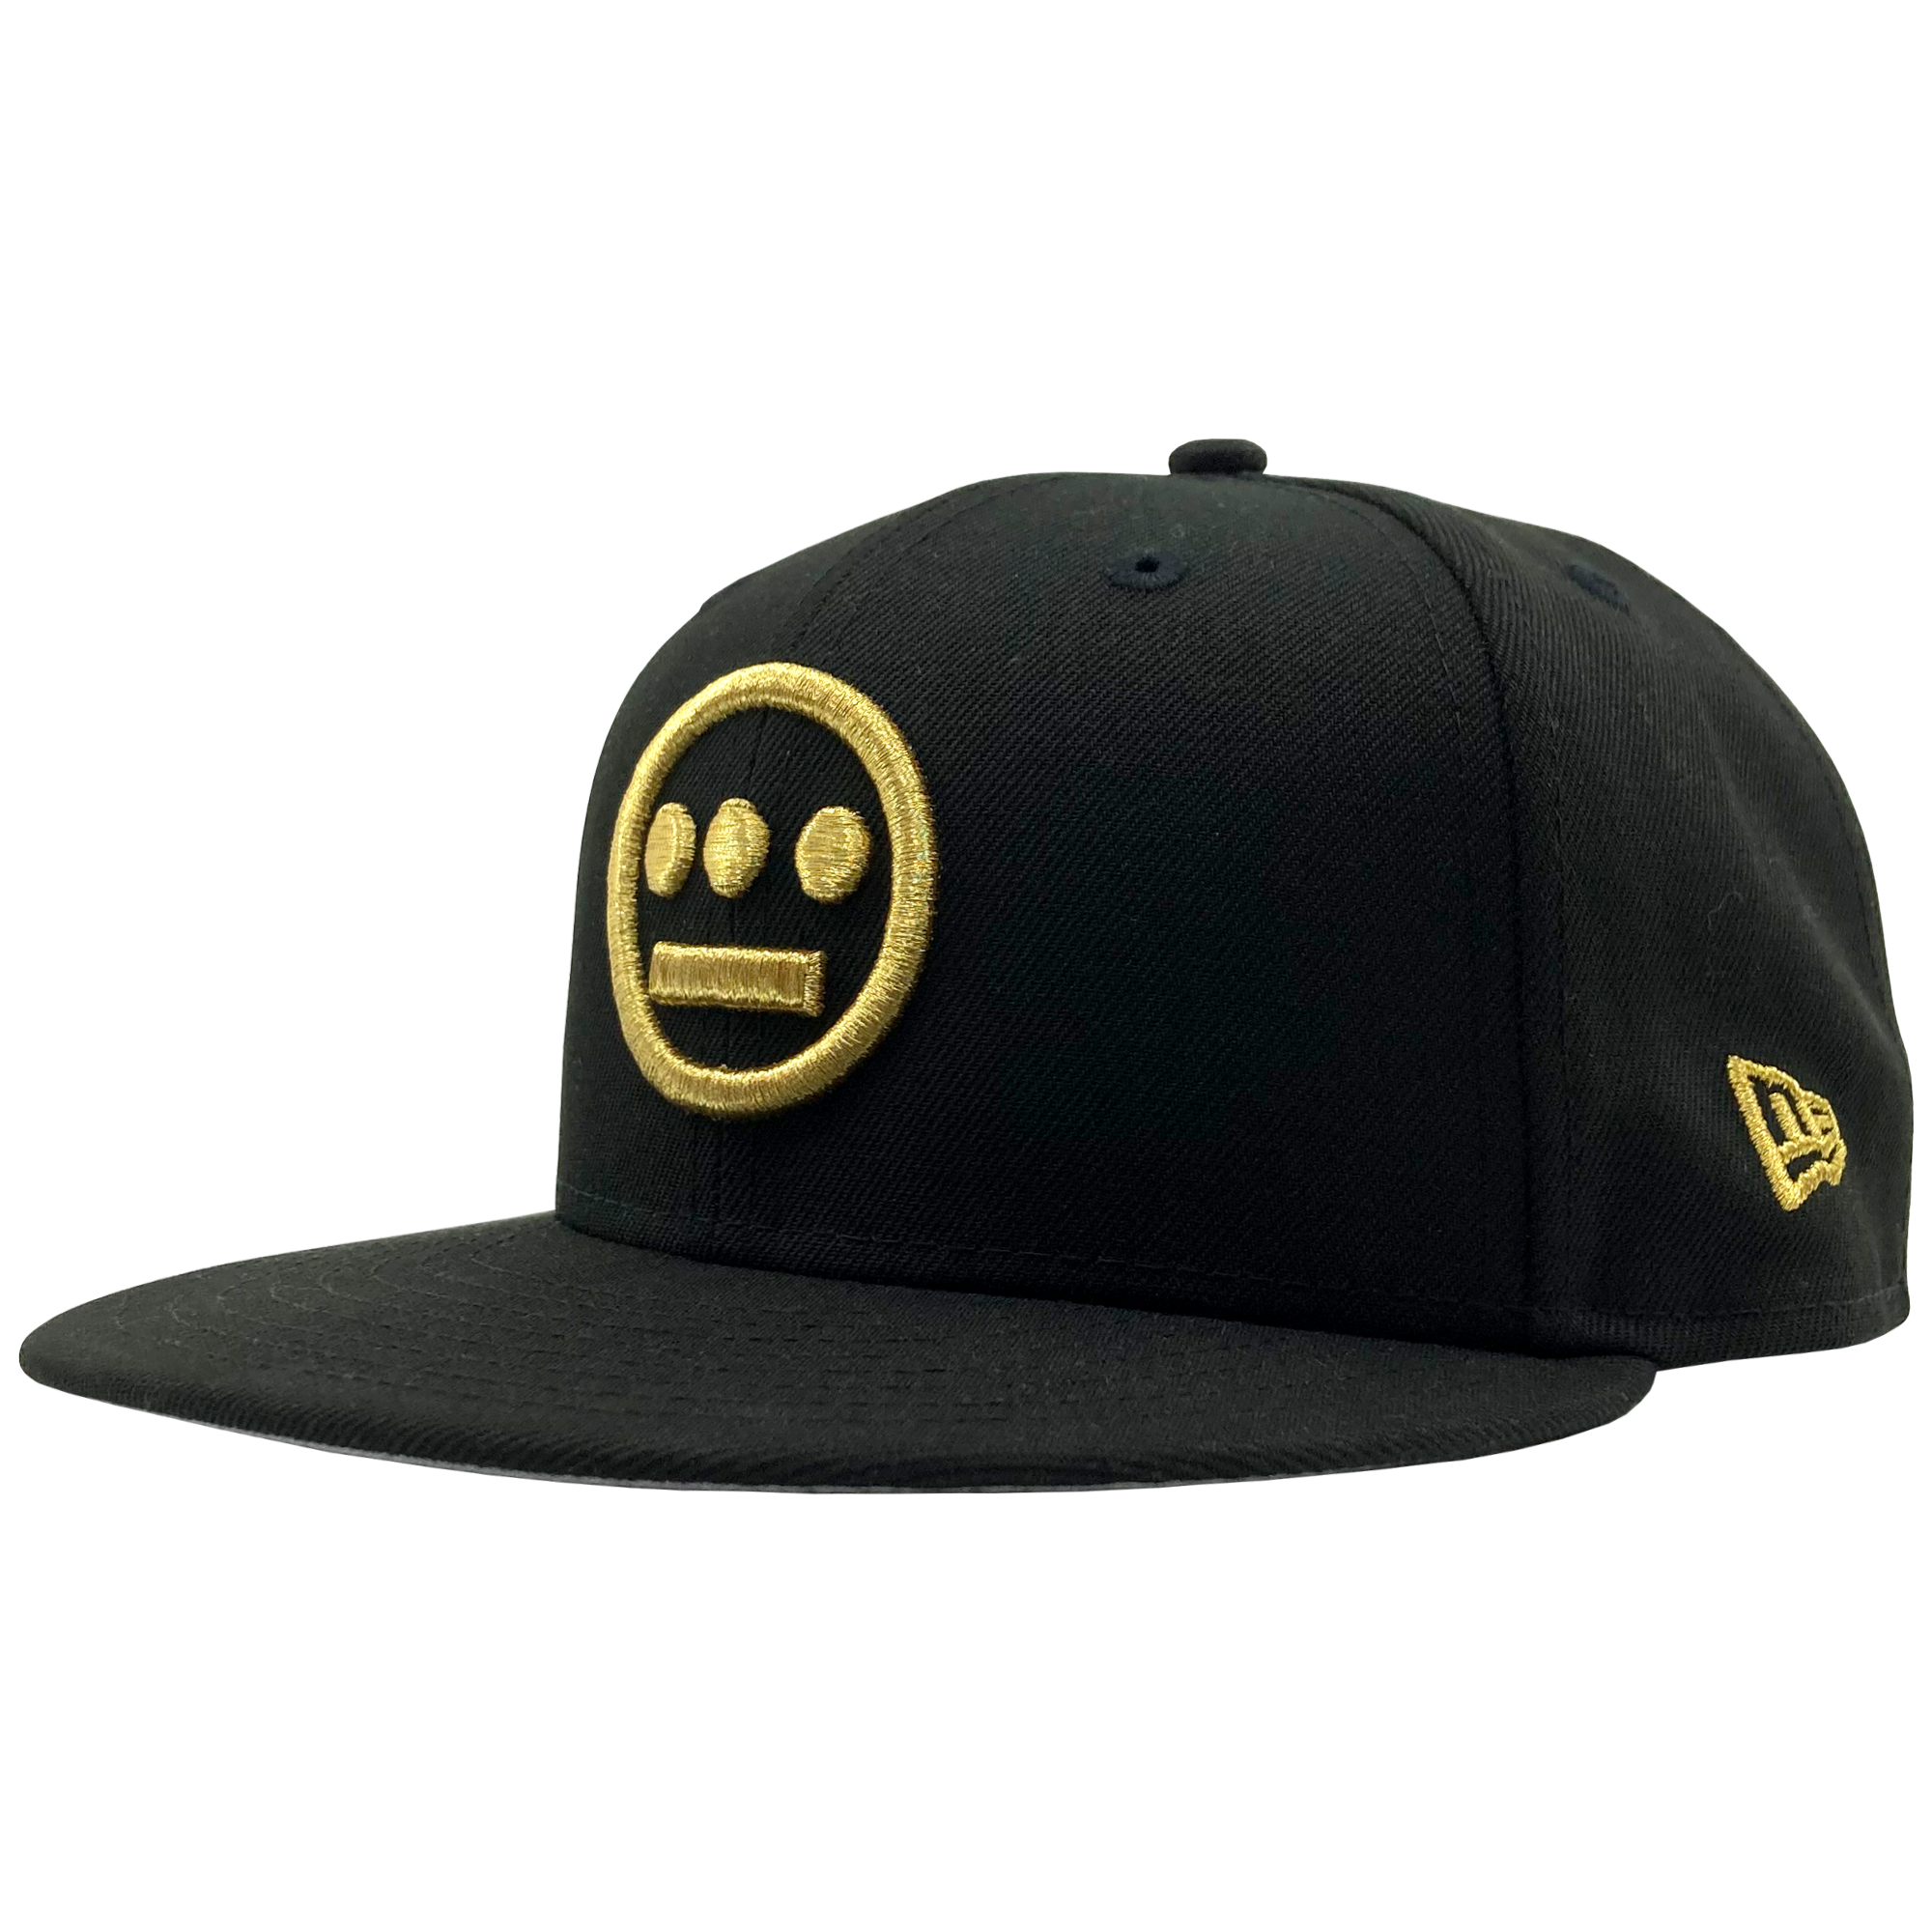 Side view of black New Era fitted cap with gold embroidered Hiero hip-hop logo on the crown.